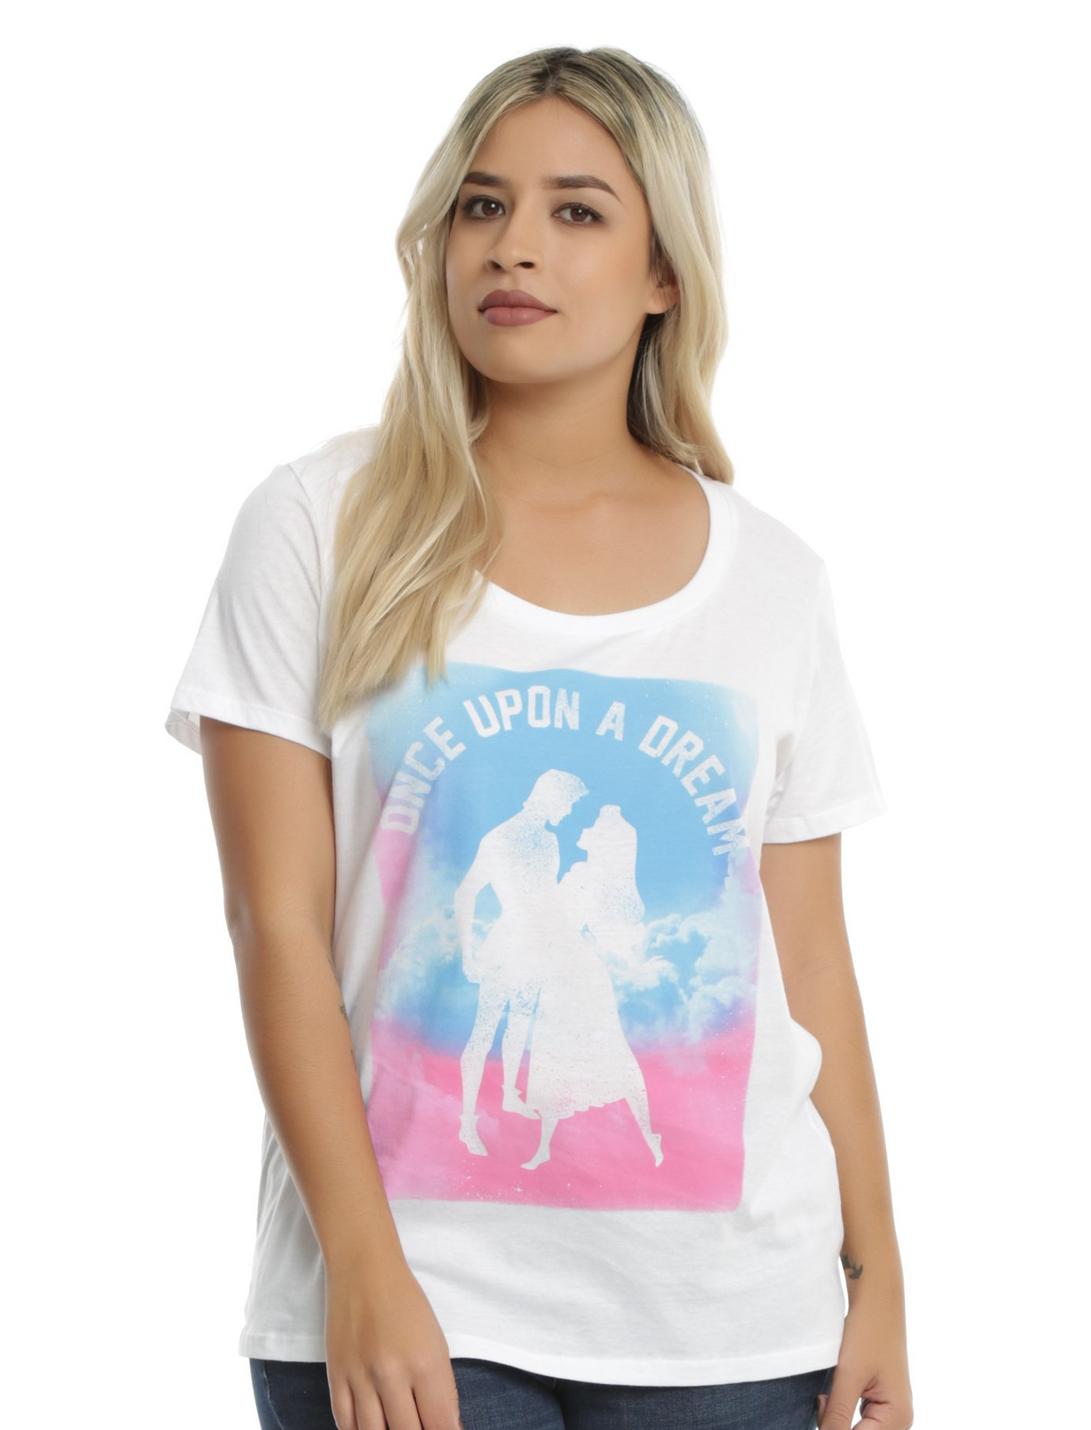 Disney Sleeping Beauty Once Upon A Dream Girls T-Shirt Plus Size, WHITE, hi-res